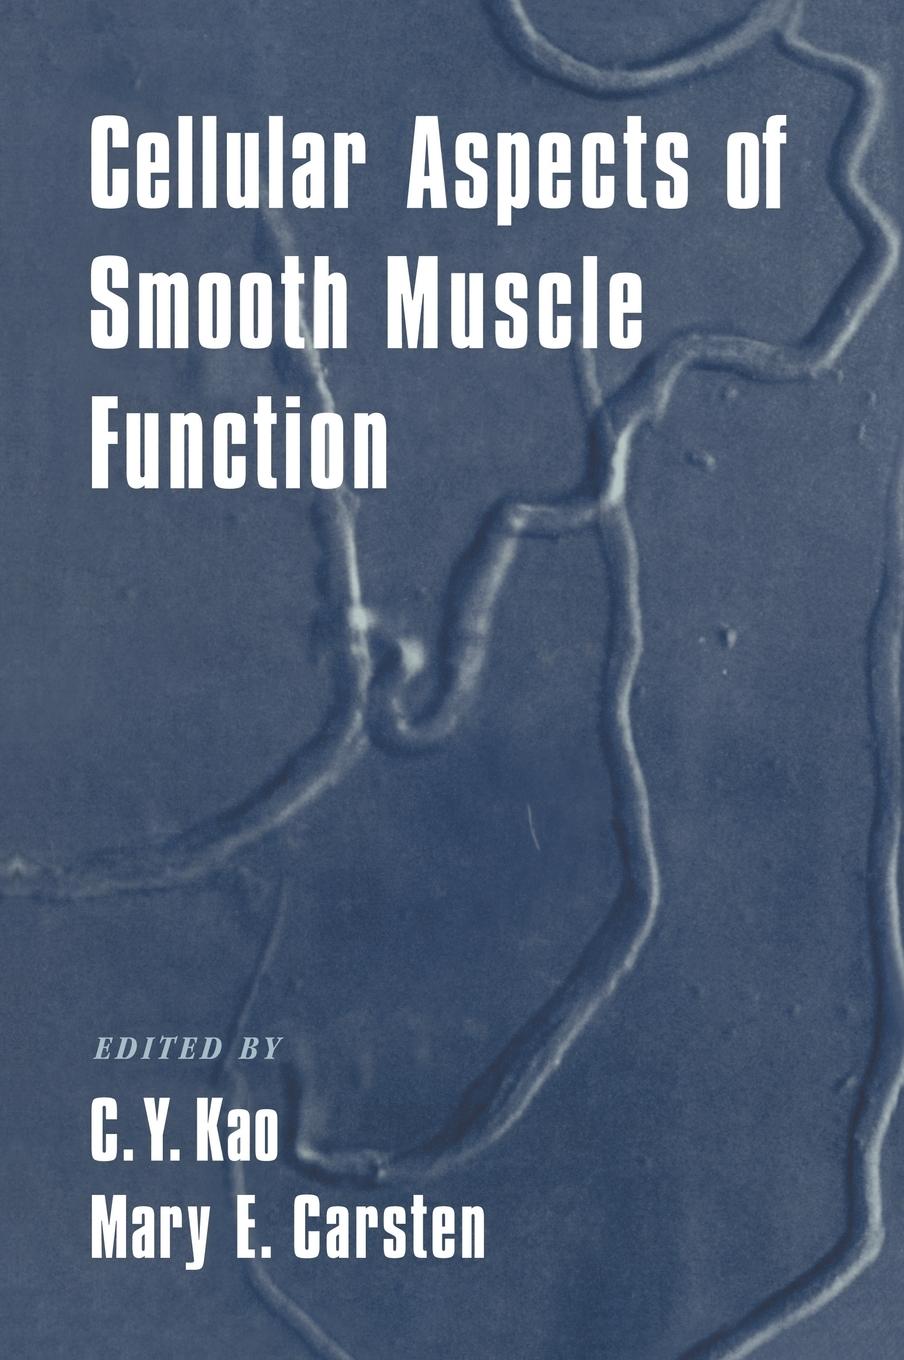 Cellular Aspects of Smooth Muscle Function